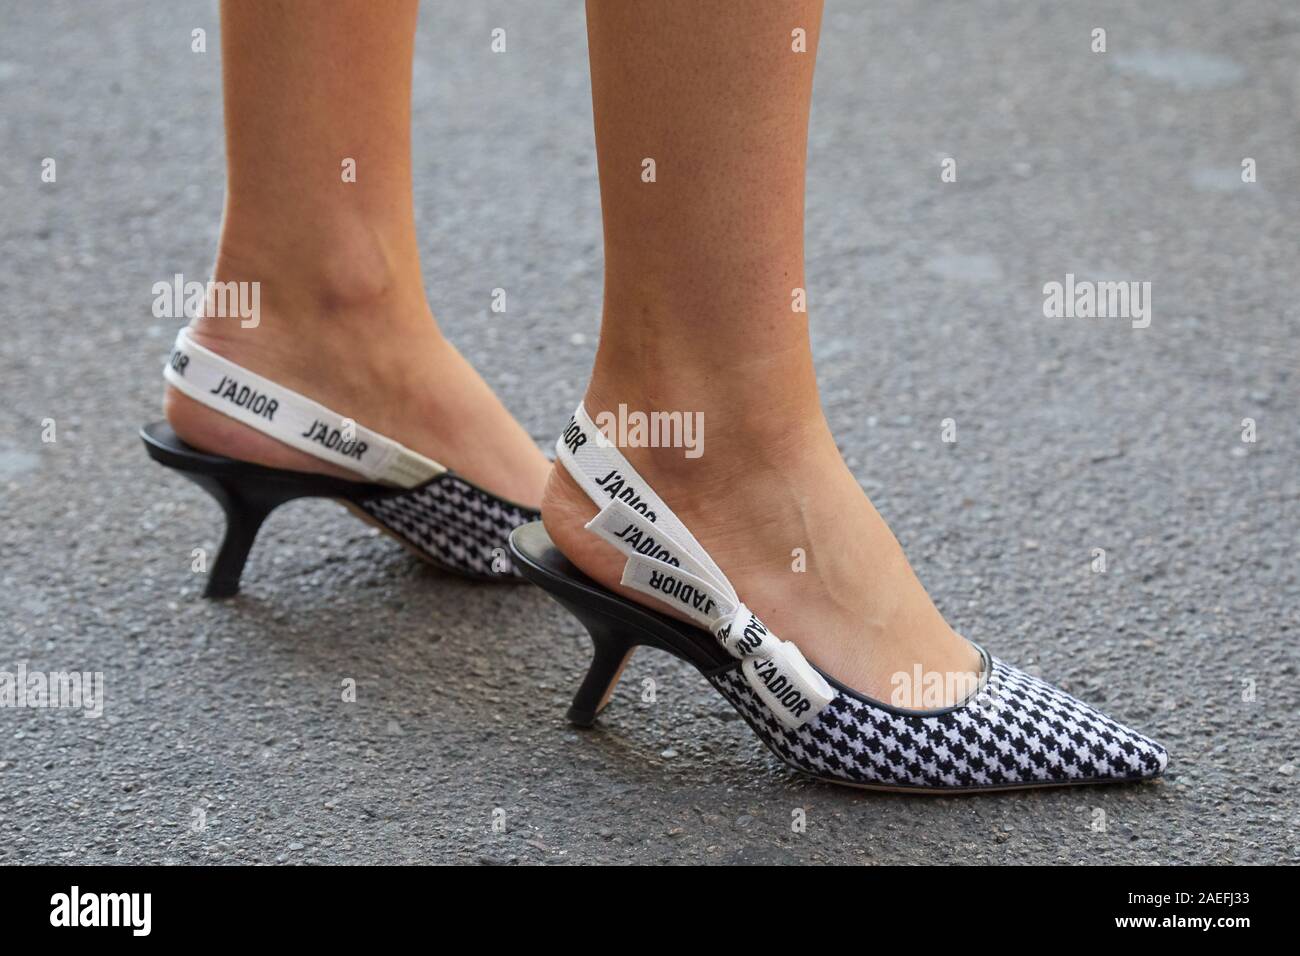 MILAN, ITALY - SEPTEMBER 21, 2019: Woman with Dior houndstooth shoes before Ermanno Scervino fashion show, Milan Fashion Week street style Stock Photo